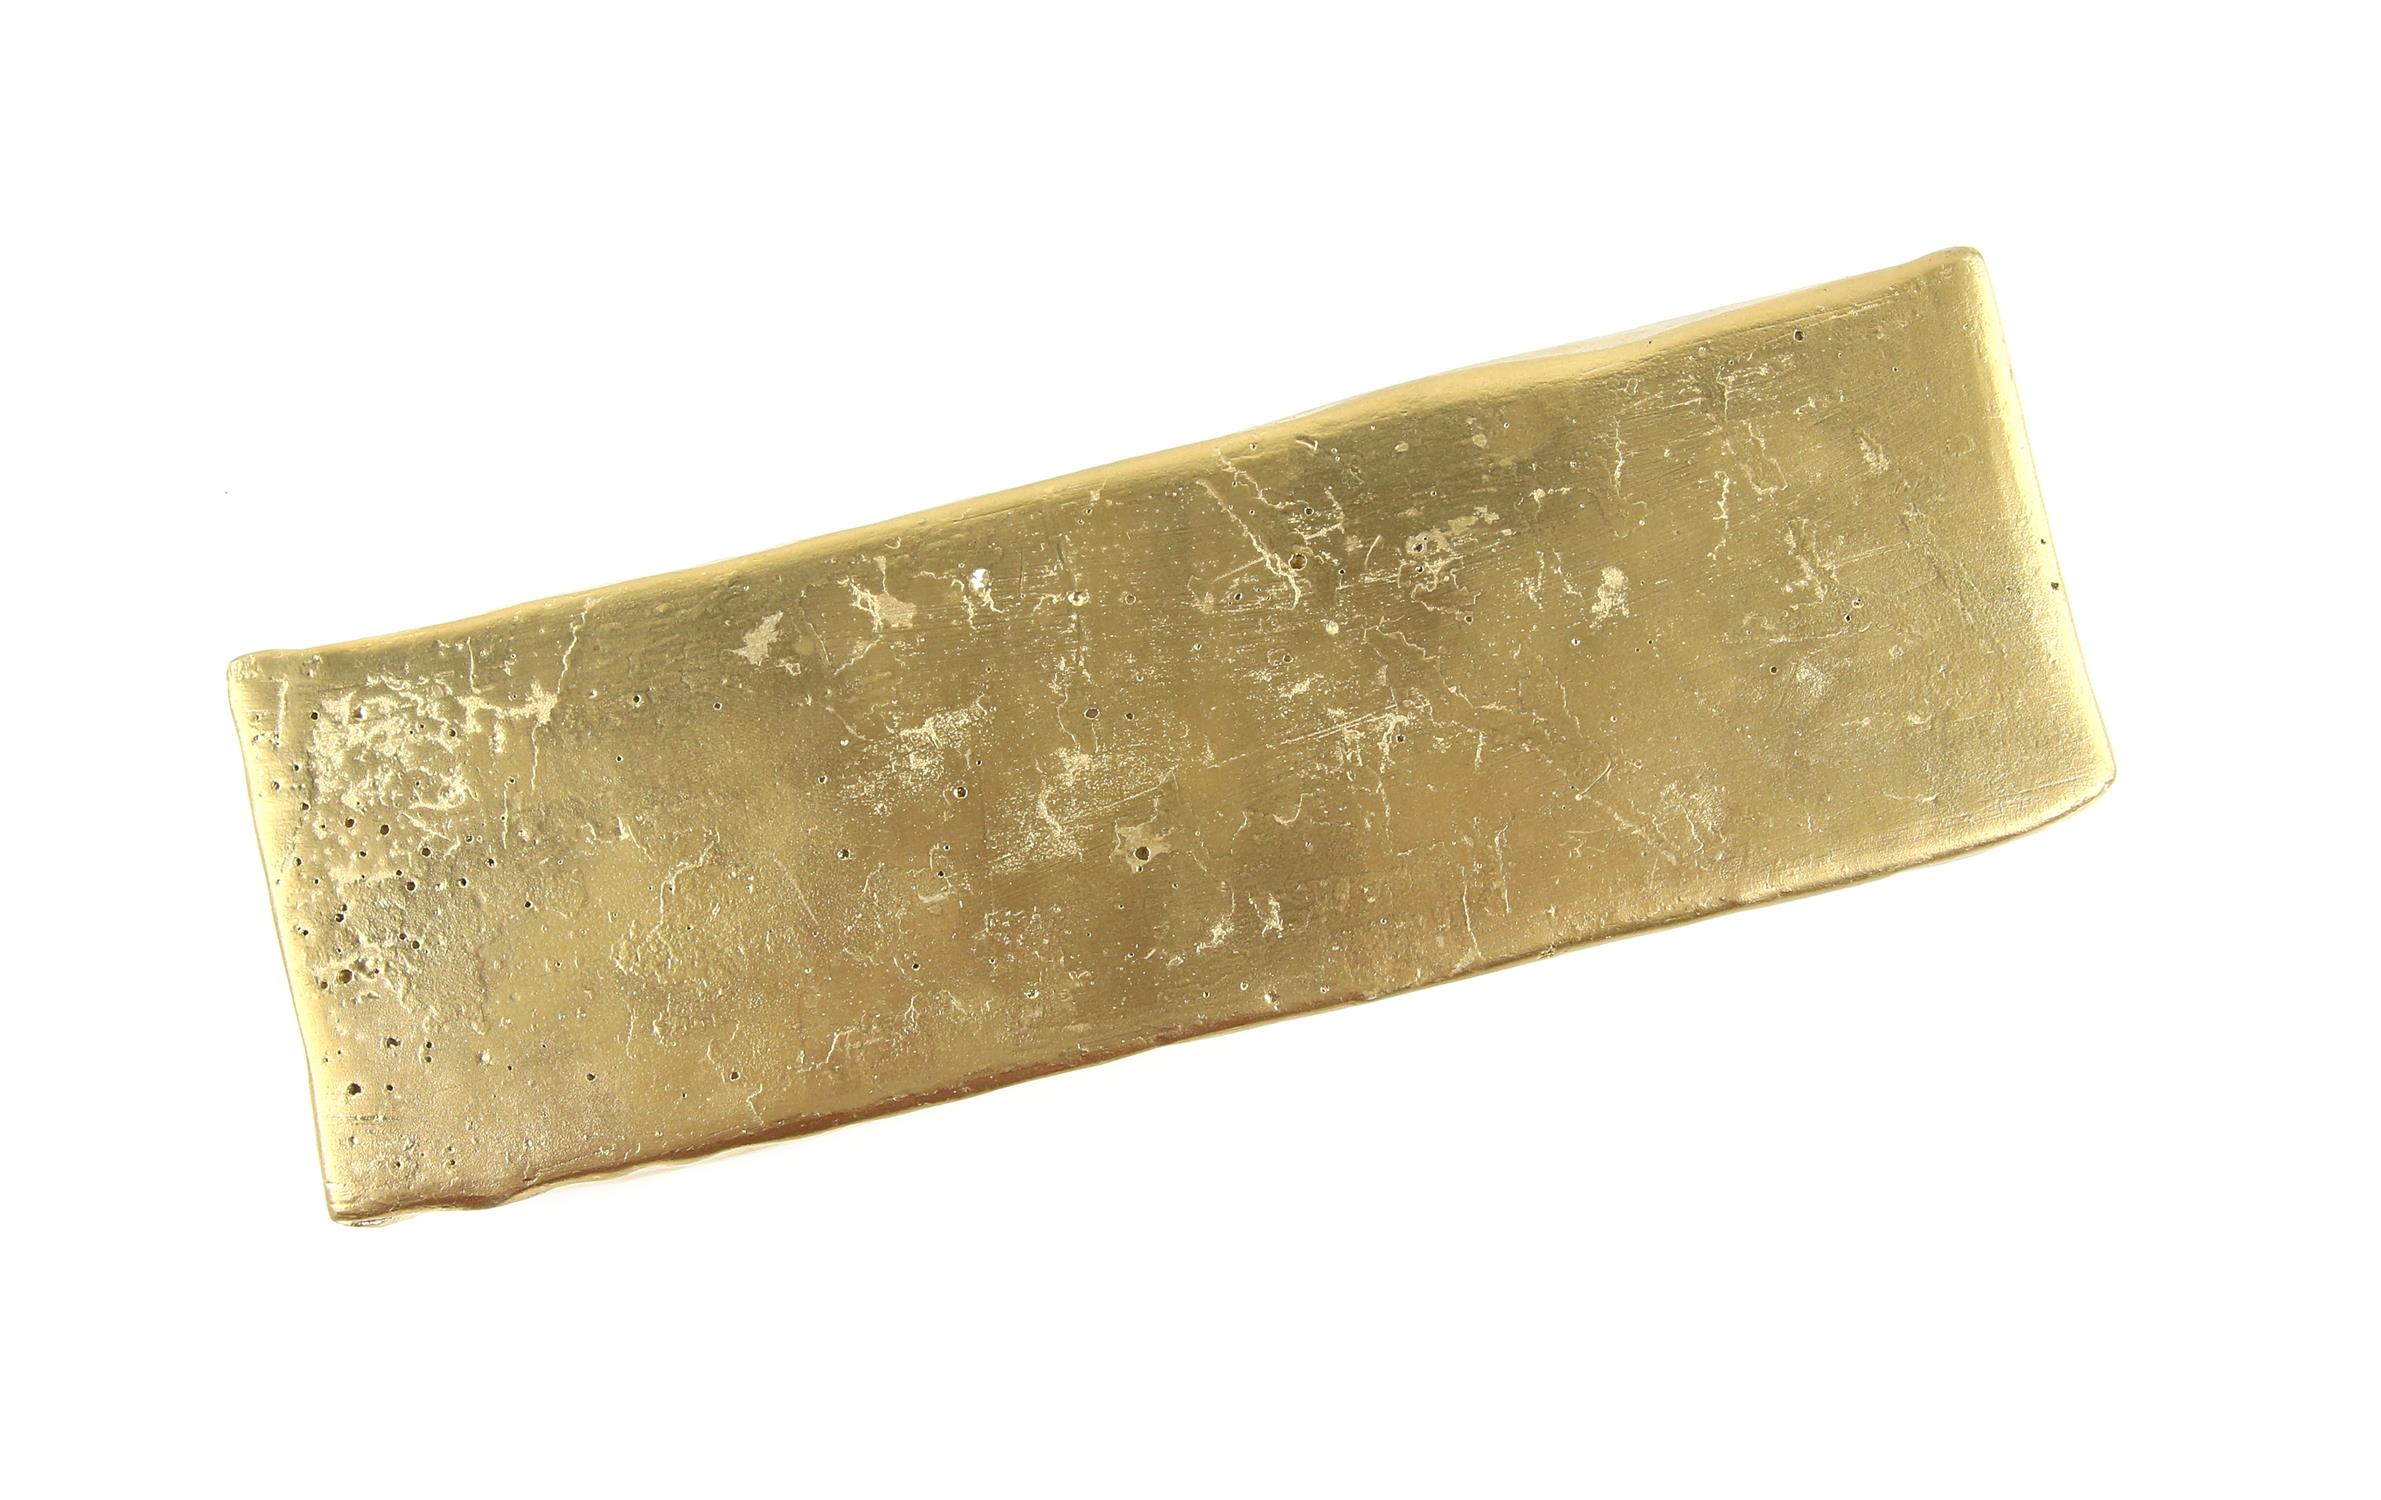 James Bond Goldfinger - Replica gold bar, gold-painted plaster, a prop gold bar of this design is - Image 2 of 2